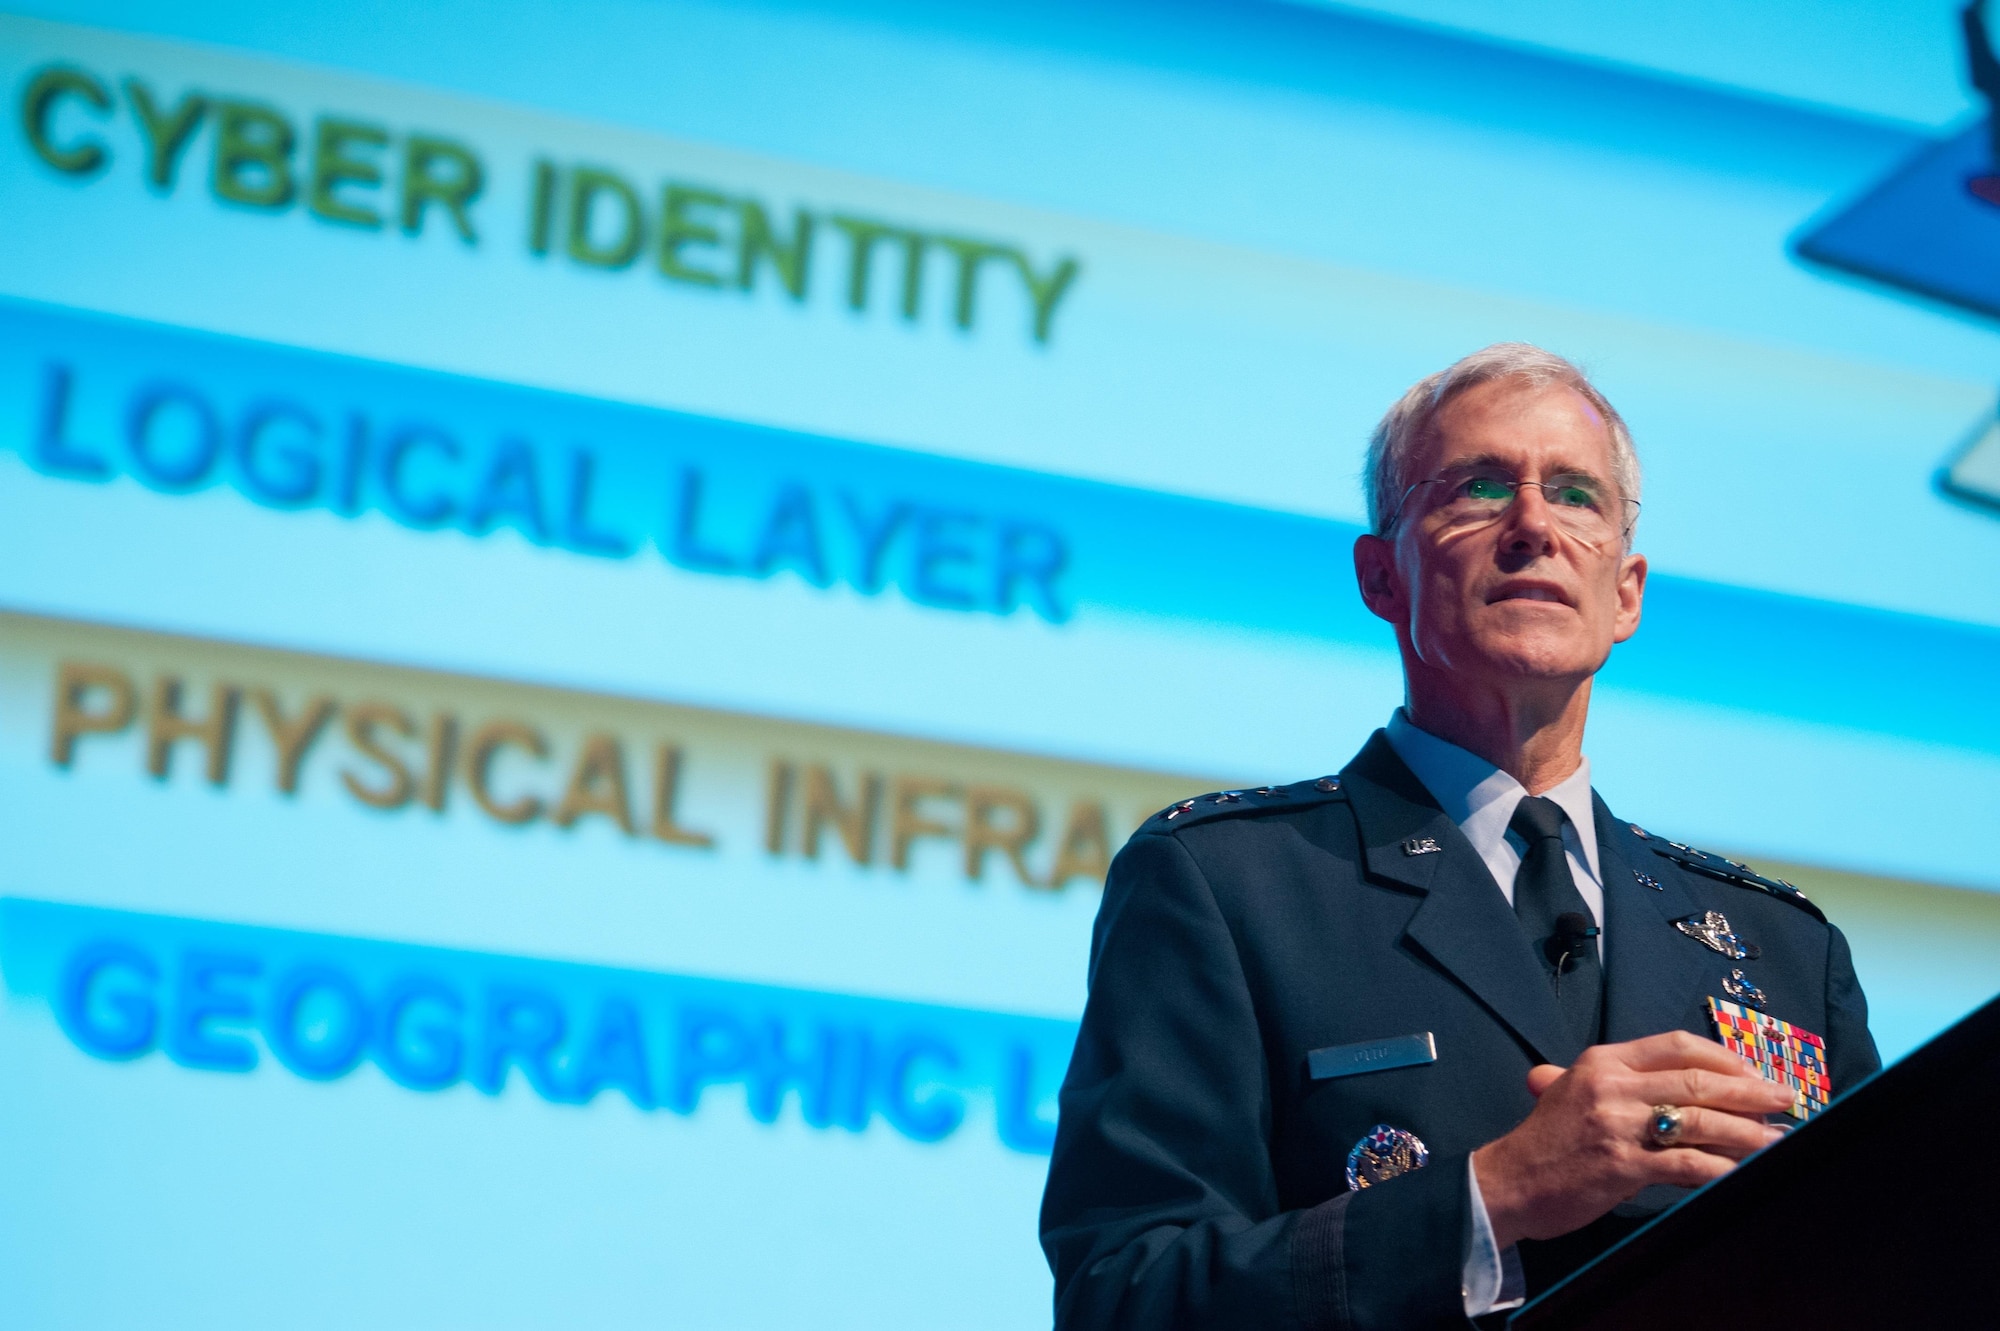 Lt. Gen. Robert Otto, then the deputy chief of staff for Intelligence, Surveillance and Reconnaissance, Headquarters U.S. Air Force, was one on many military and industry keynote speakers at the 2016 Air Force Information Technology and Cyberpower Conference, Aug. 28-30, 2017, in Montgomery, Alabama.  His successor in the position, Lt. Gen. VeraLinn Jamieson, is scheduled to speak at this year’s conference. (U.S. Air Force photo/Melanie Cox)